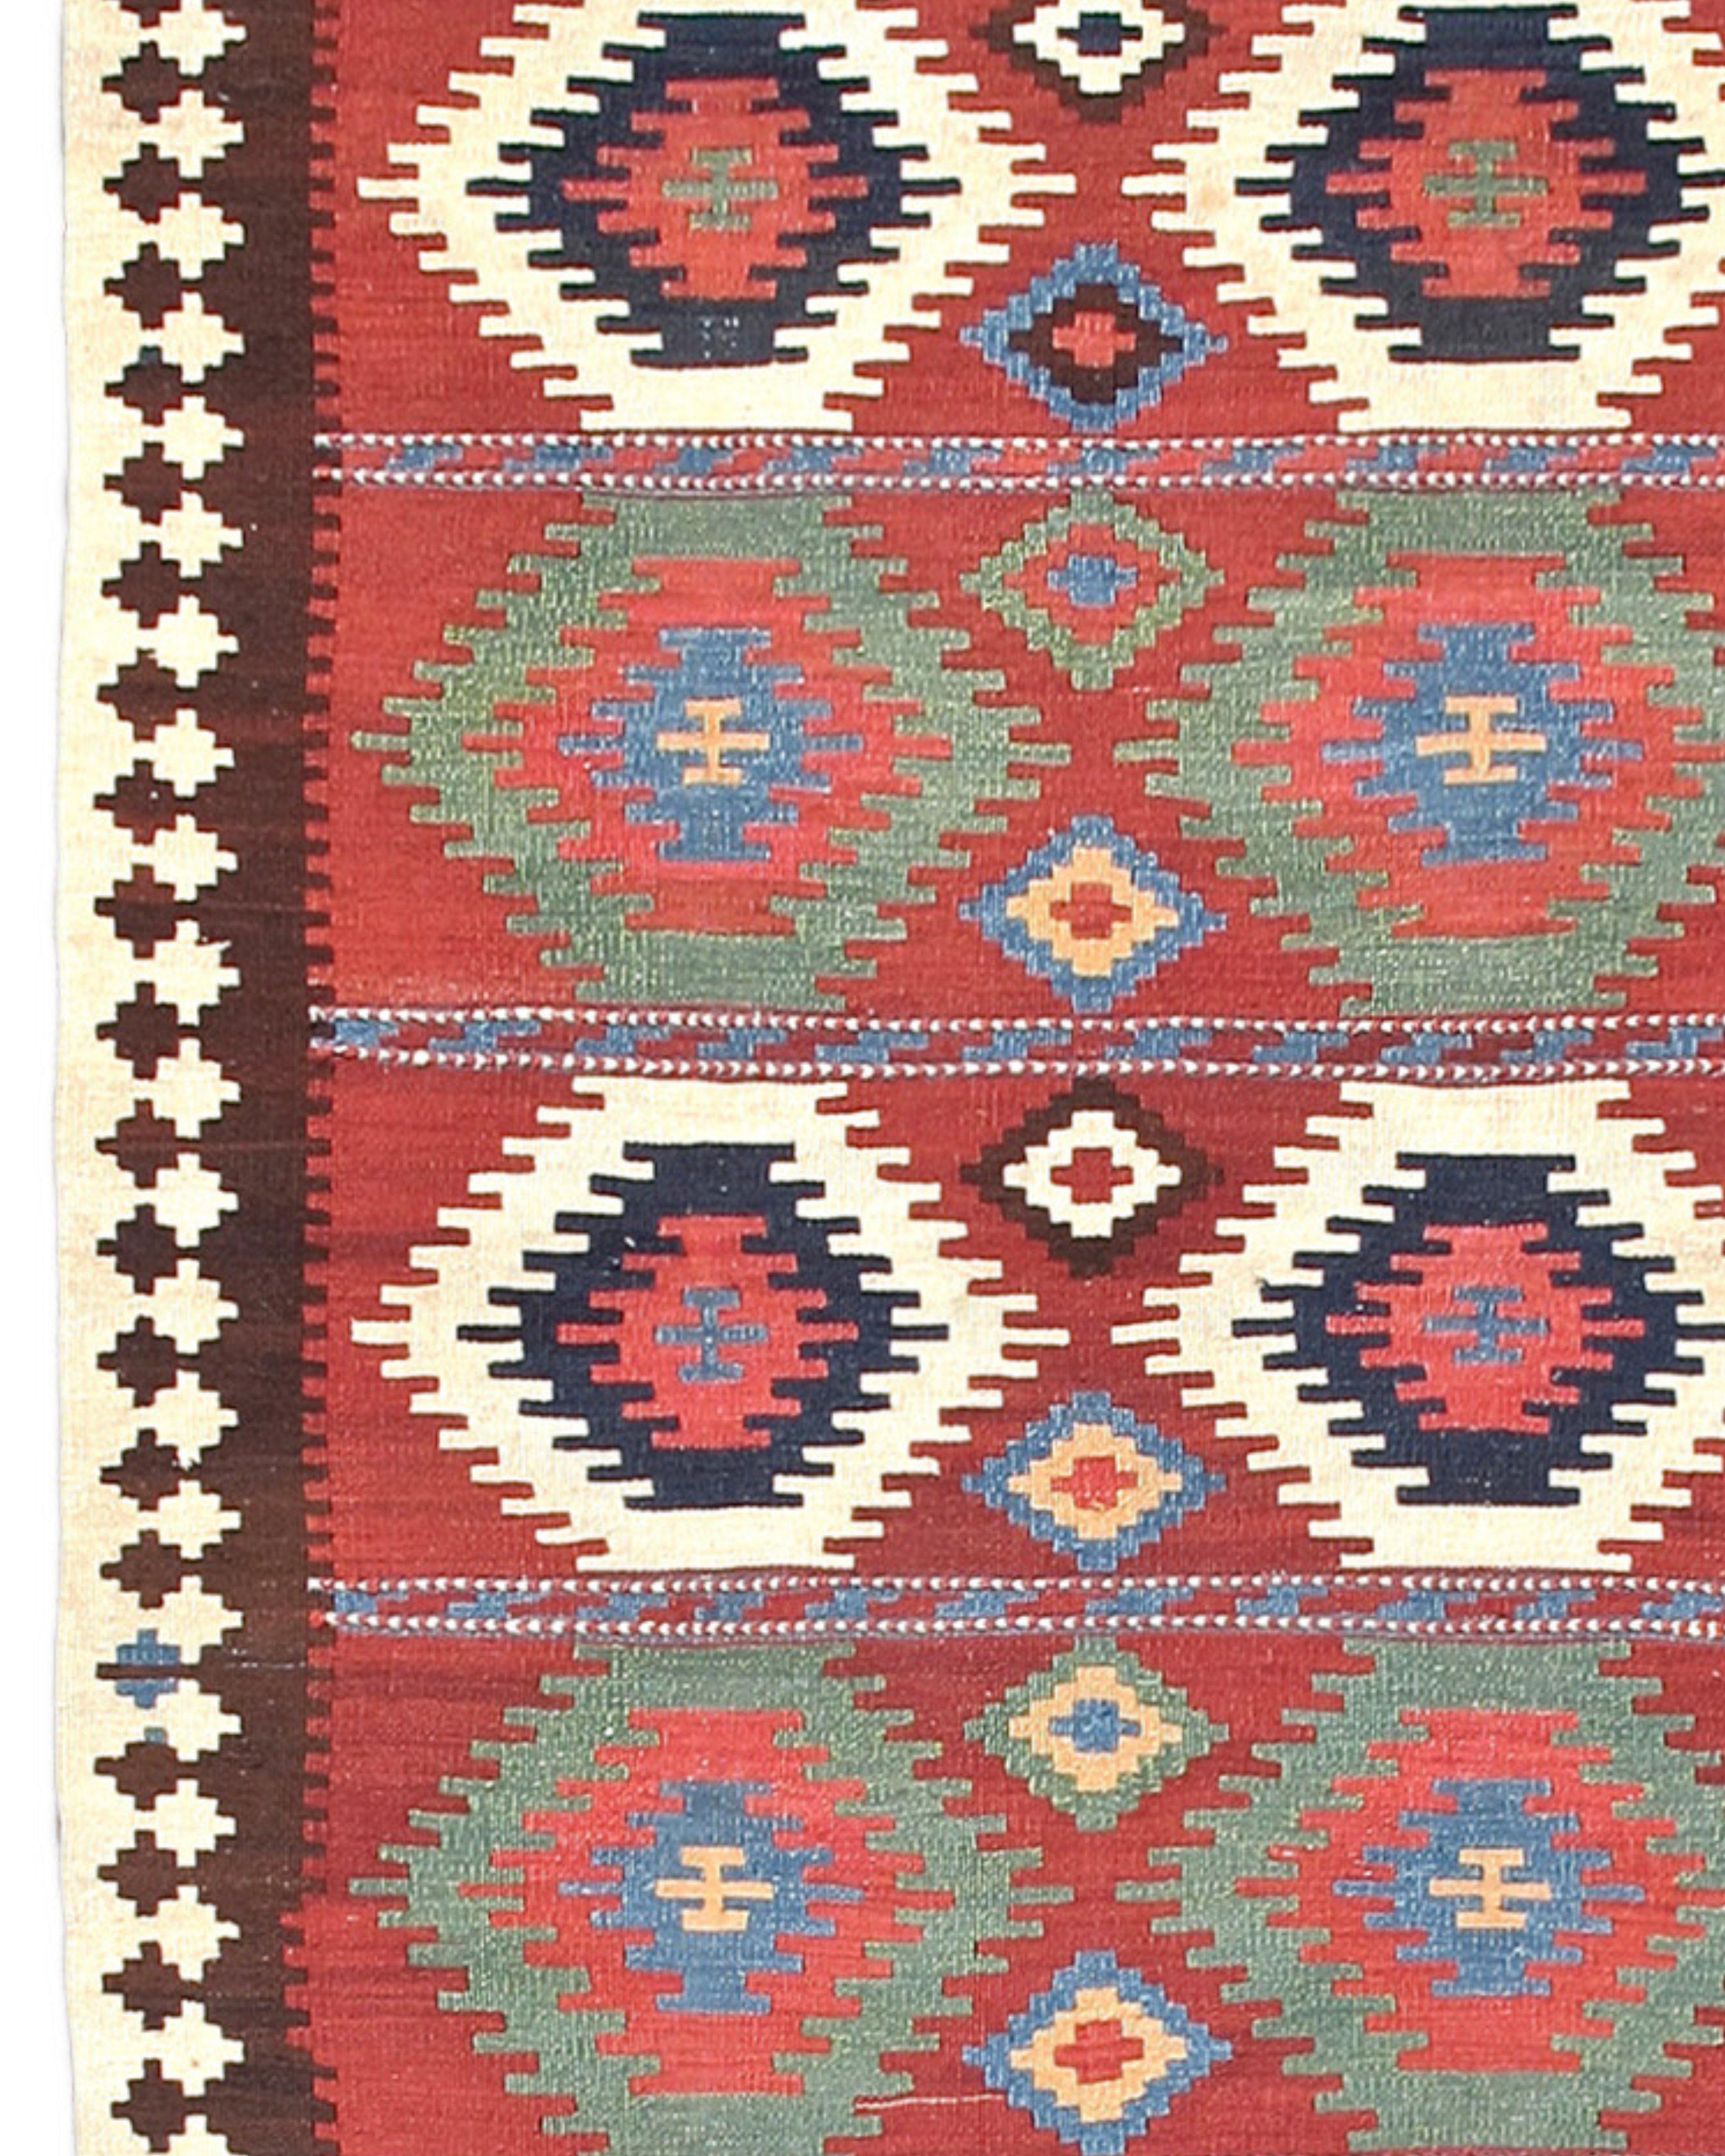 Antique Persian Shahsevan Kilim Rug, c. 1900 In Excellent Condition For Sale In San Francisco, CA